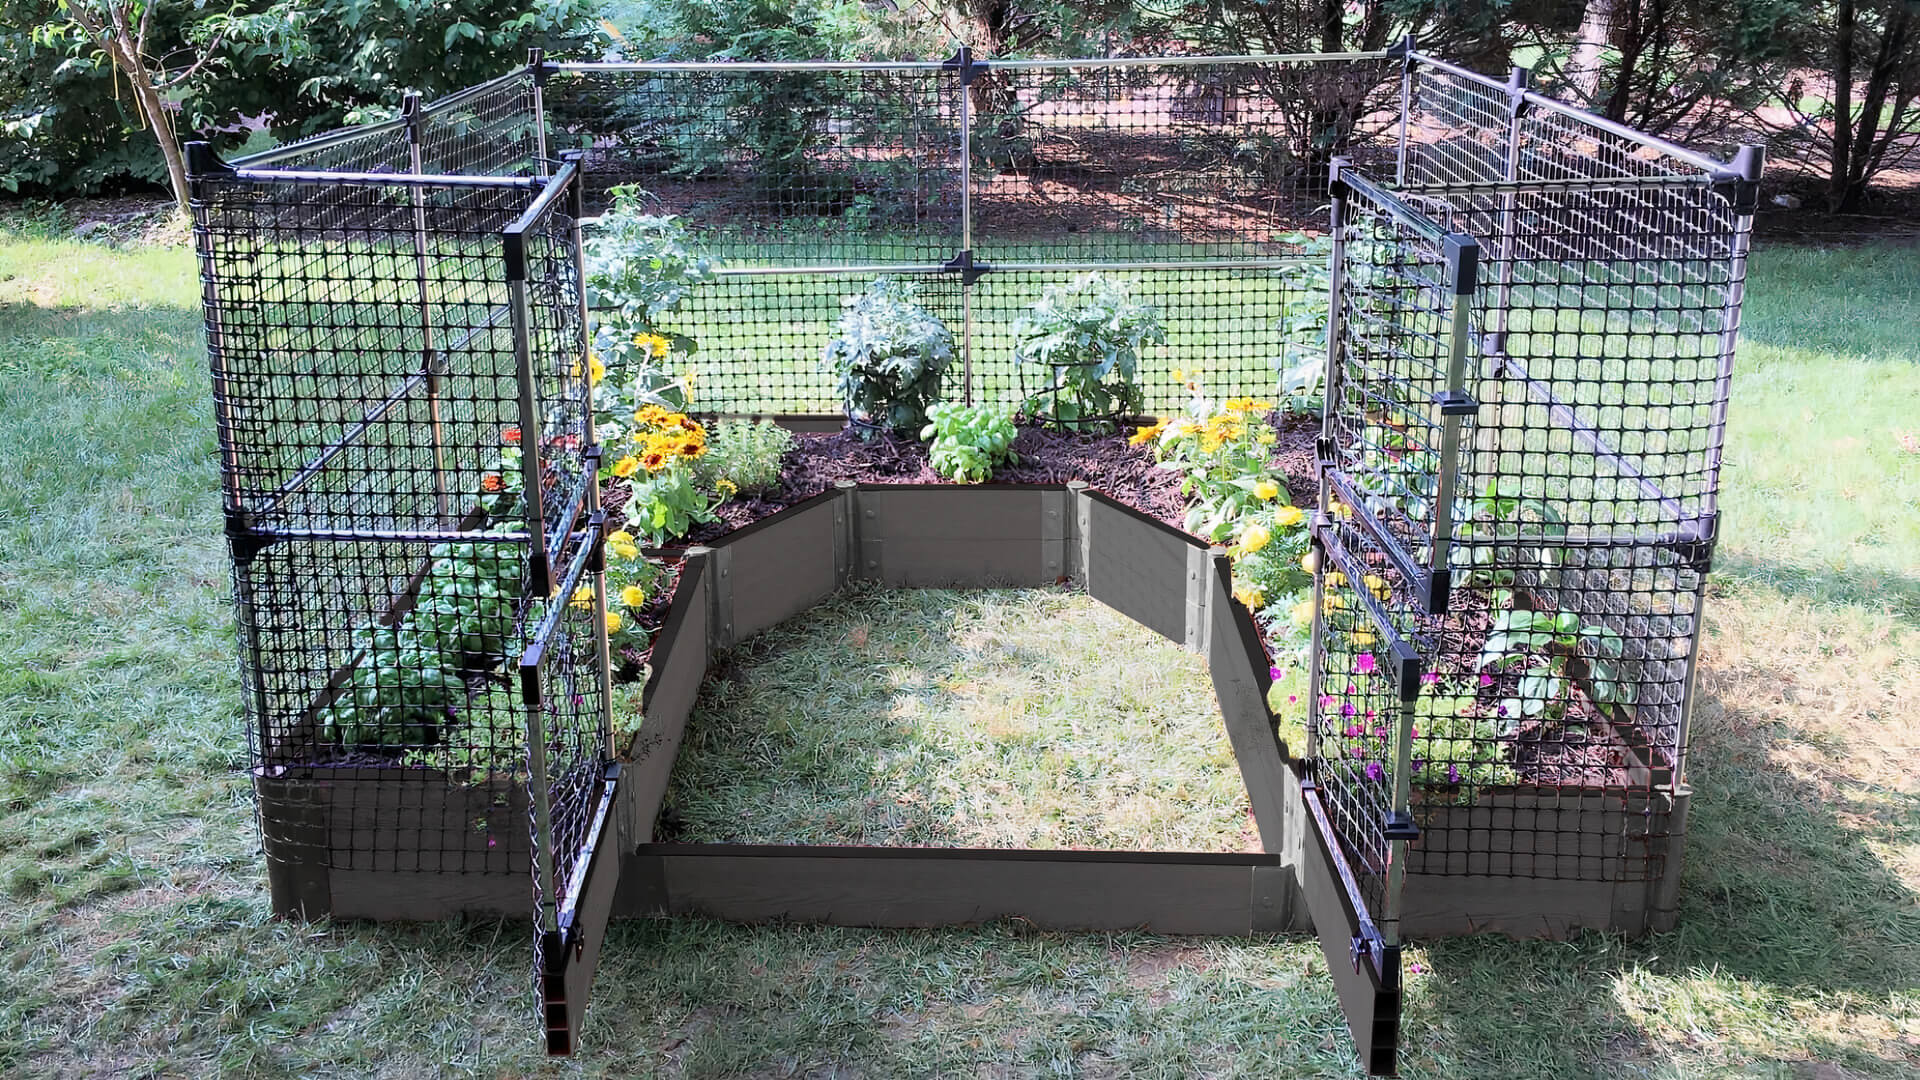 Walk-In 'Topolski' 8' x 8' Animal Barrier Raised Garden Bed - 2" Profile Raised Garden Beds Frame It All Weathered Wood 2 Inch 2 Levels = 11 Inches 4 Foot